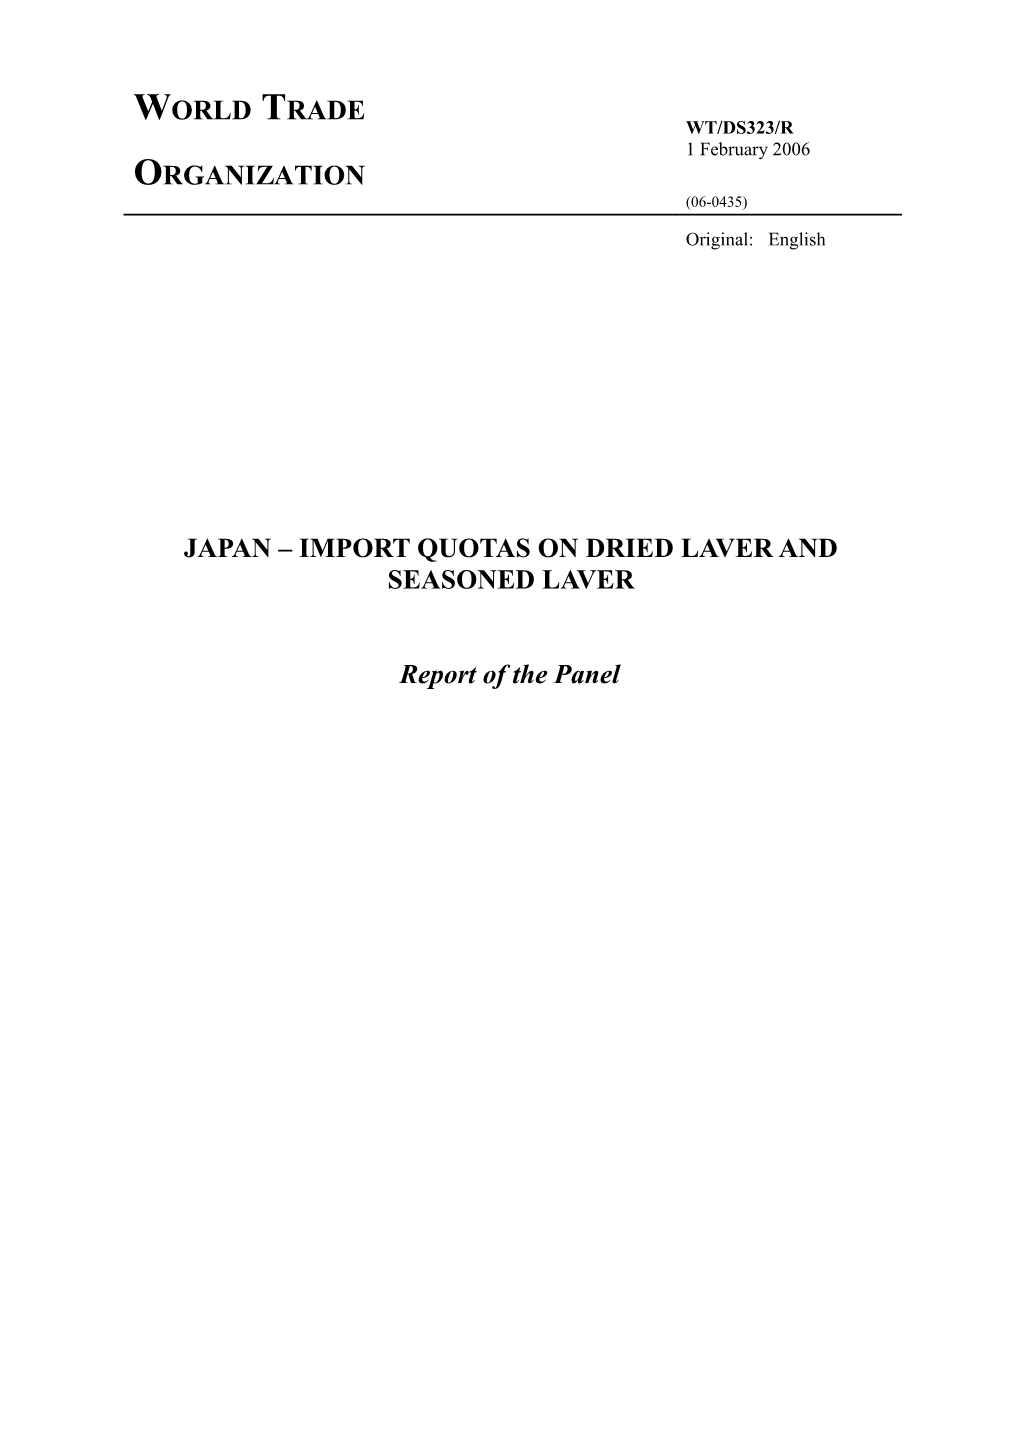 Japan Import Quotas on Dried Laver and Seasoned Laver